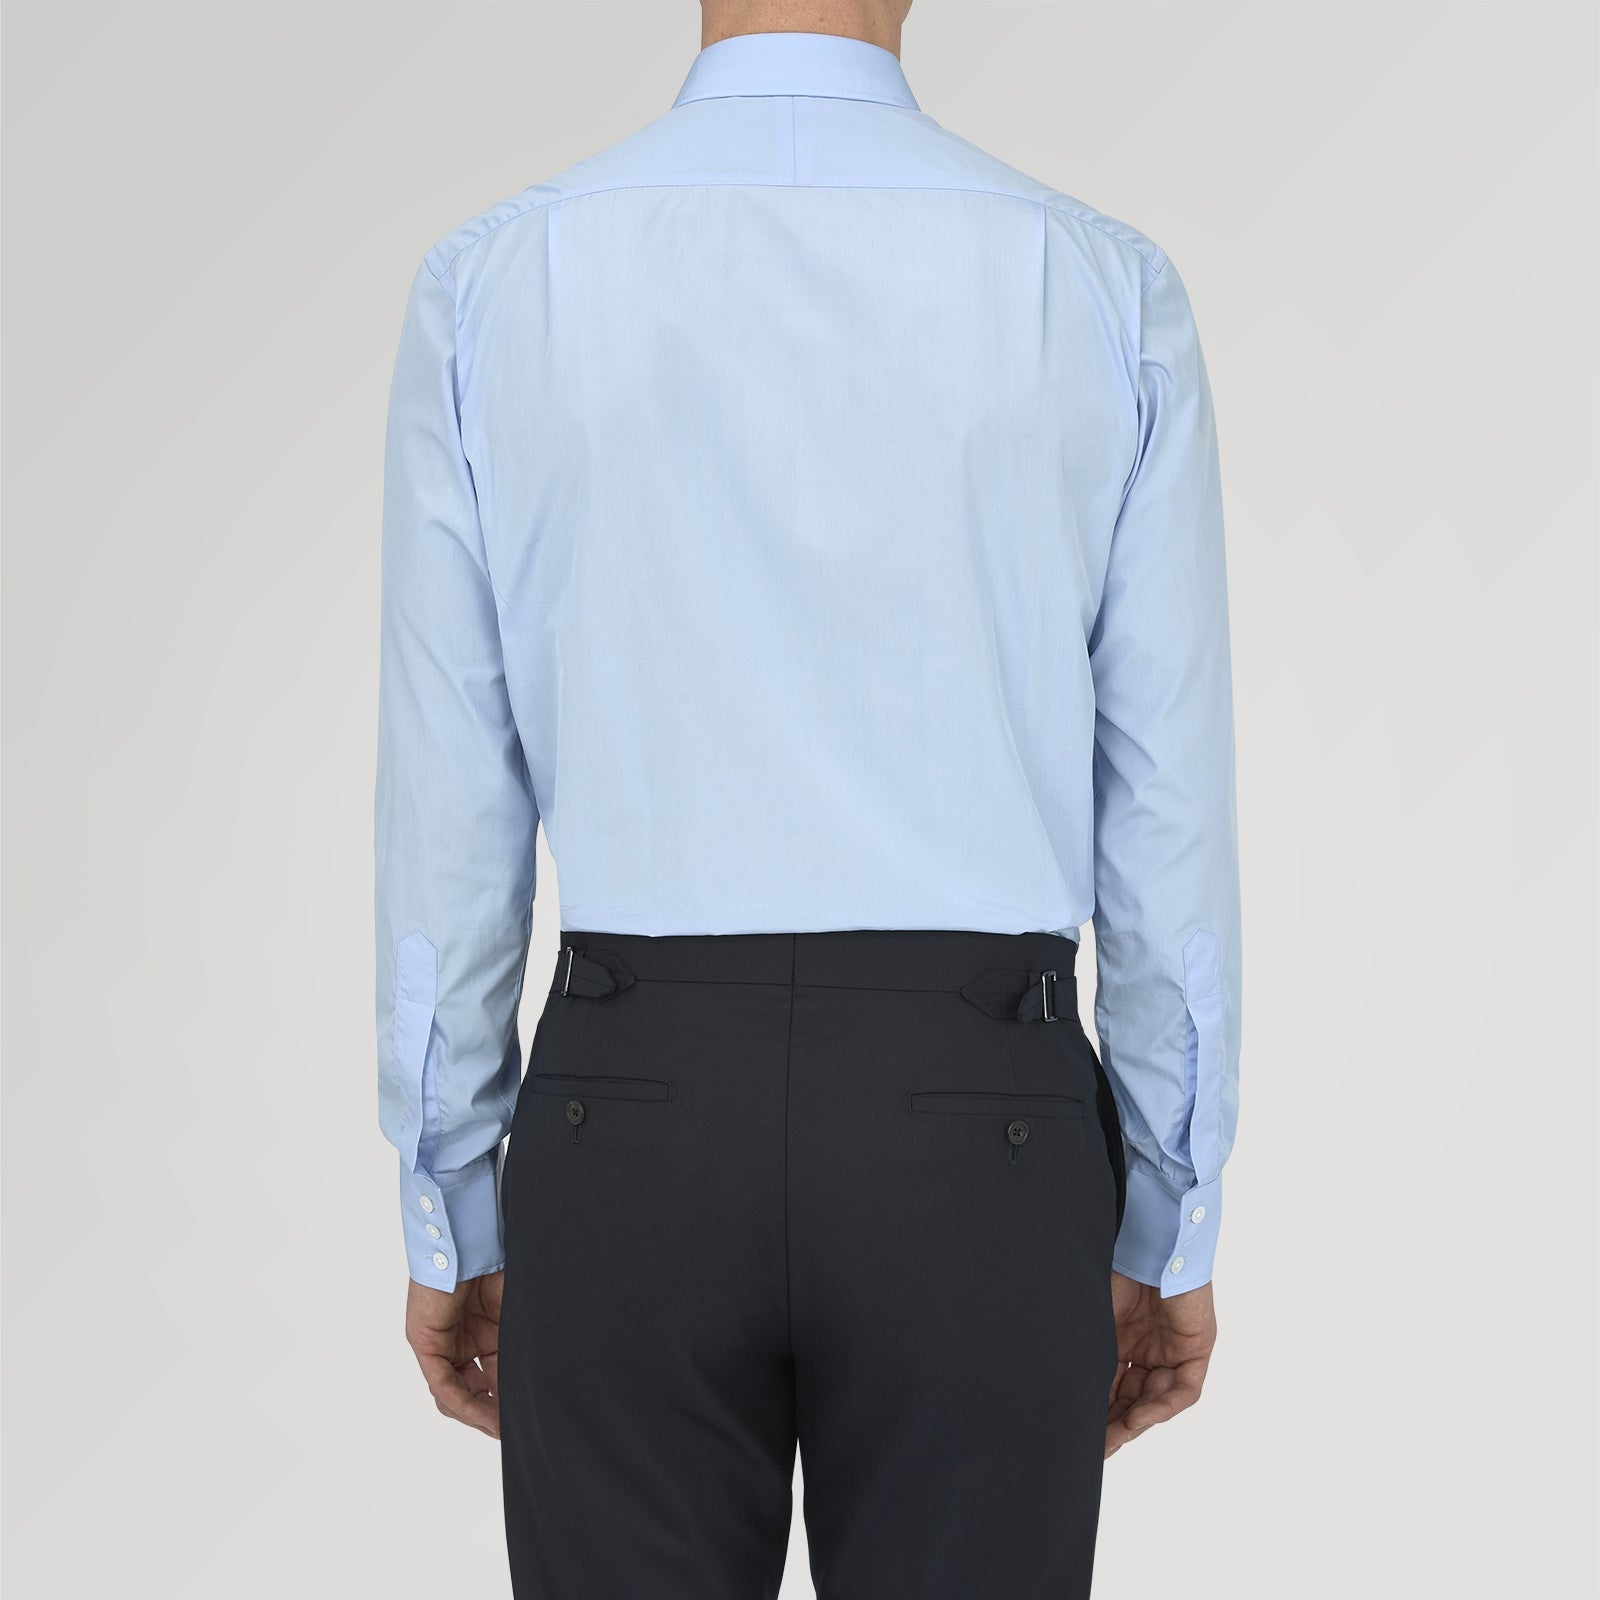 Two-Fold 200 Blue Cotton Shirt with T&A Collar and 3-Button Cuffs